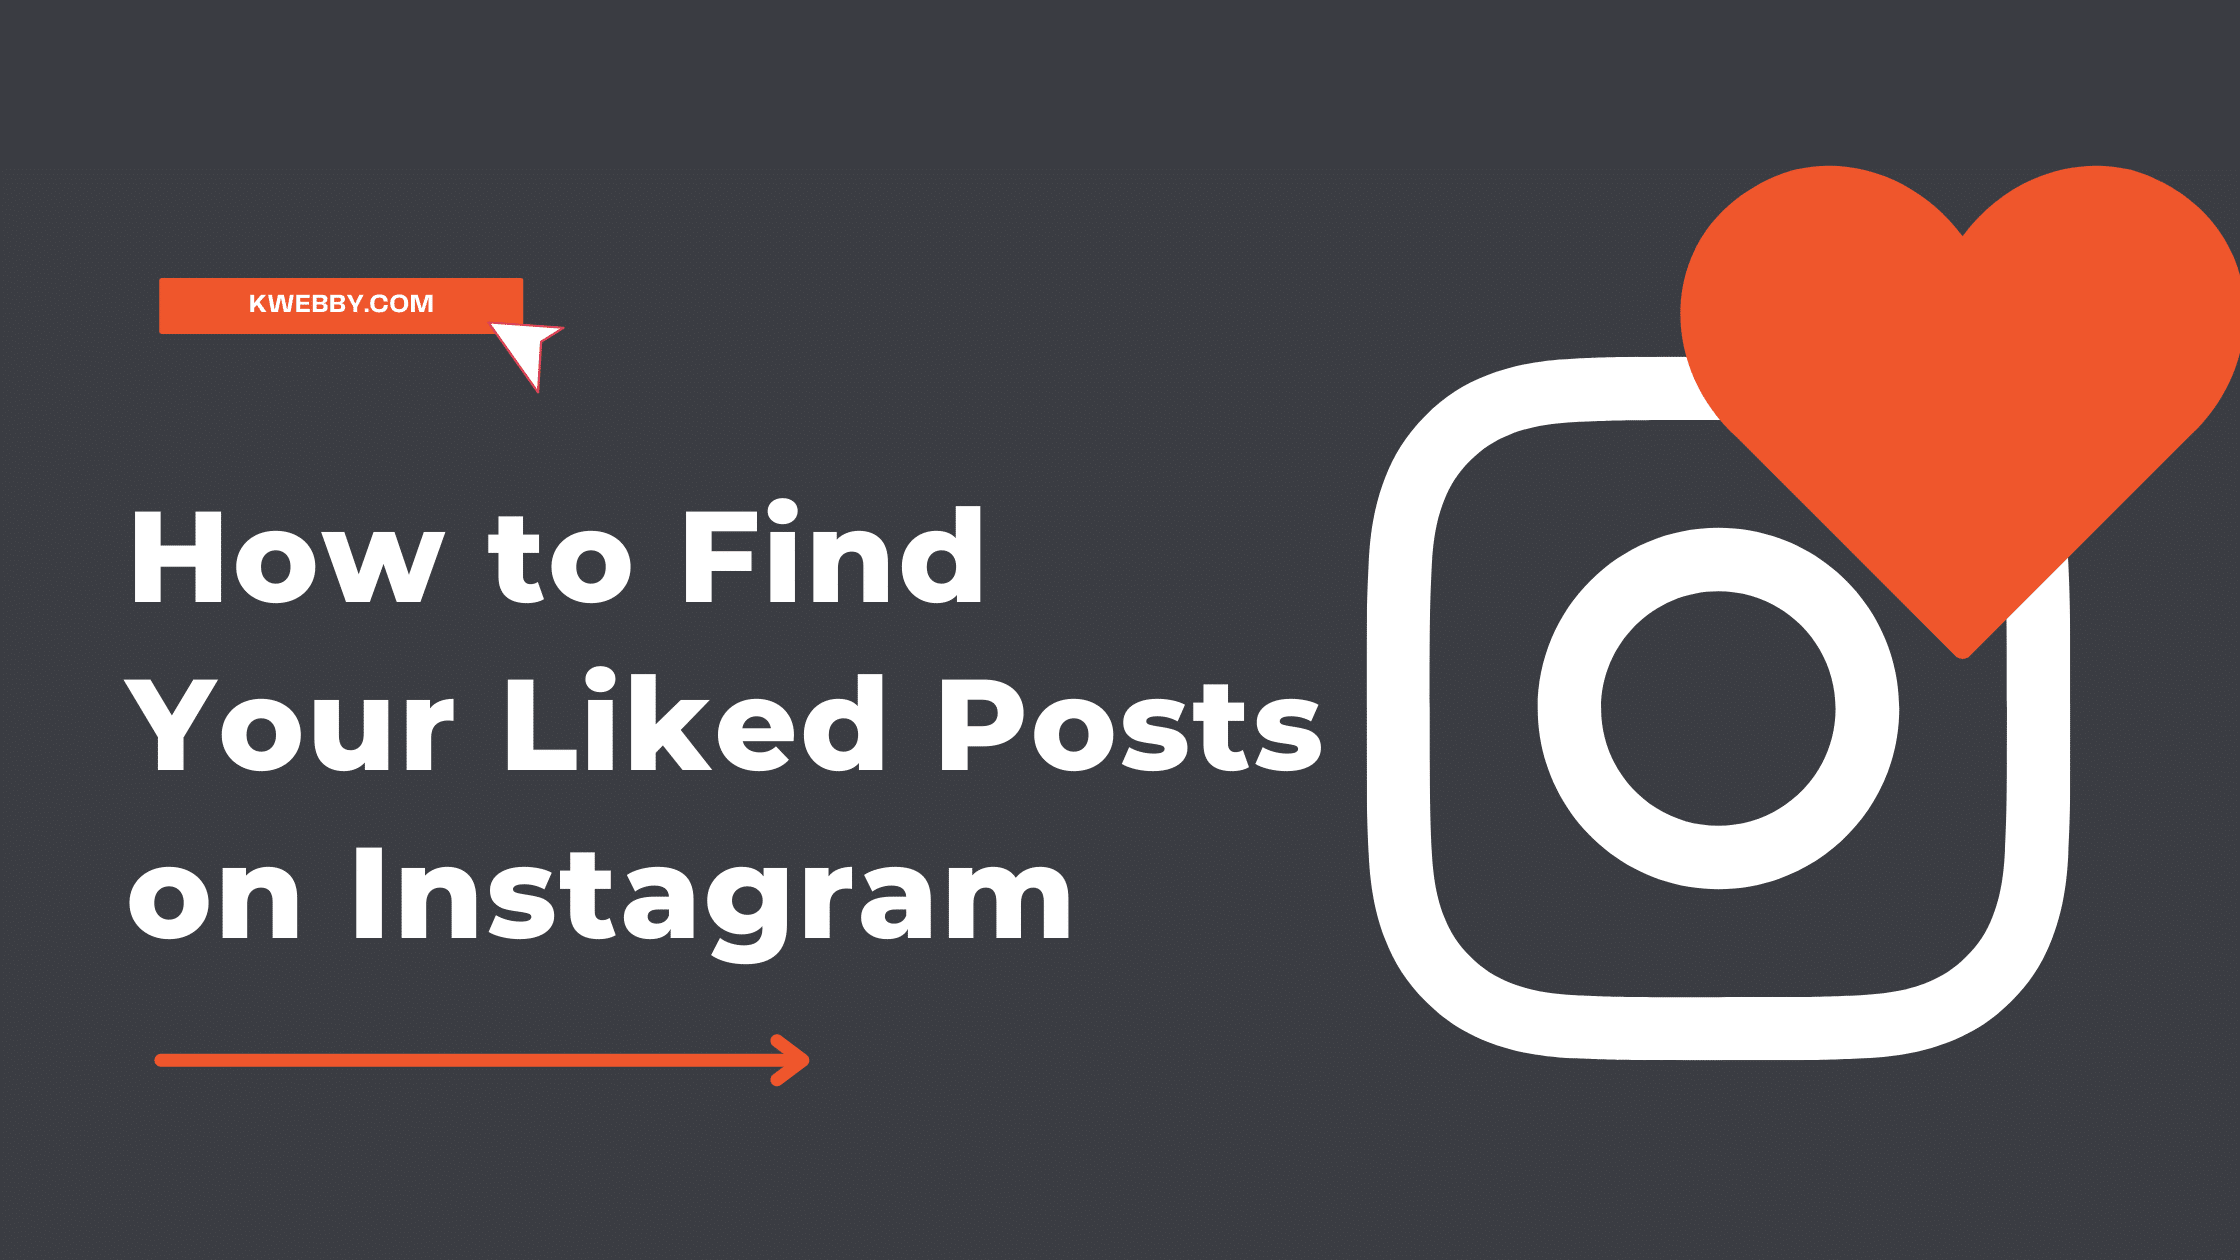 How to Find Your Liked Posts on Instagram Quickly in 3 Steps